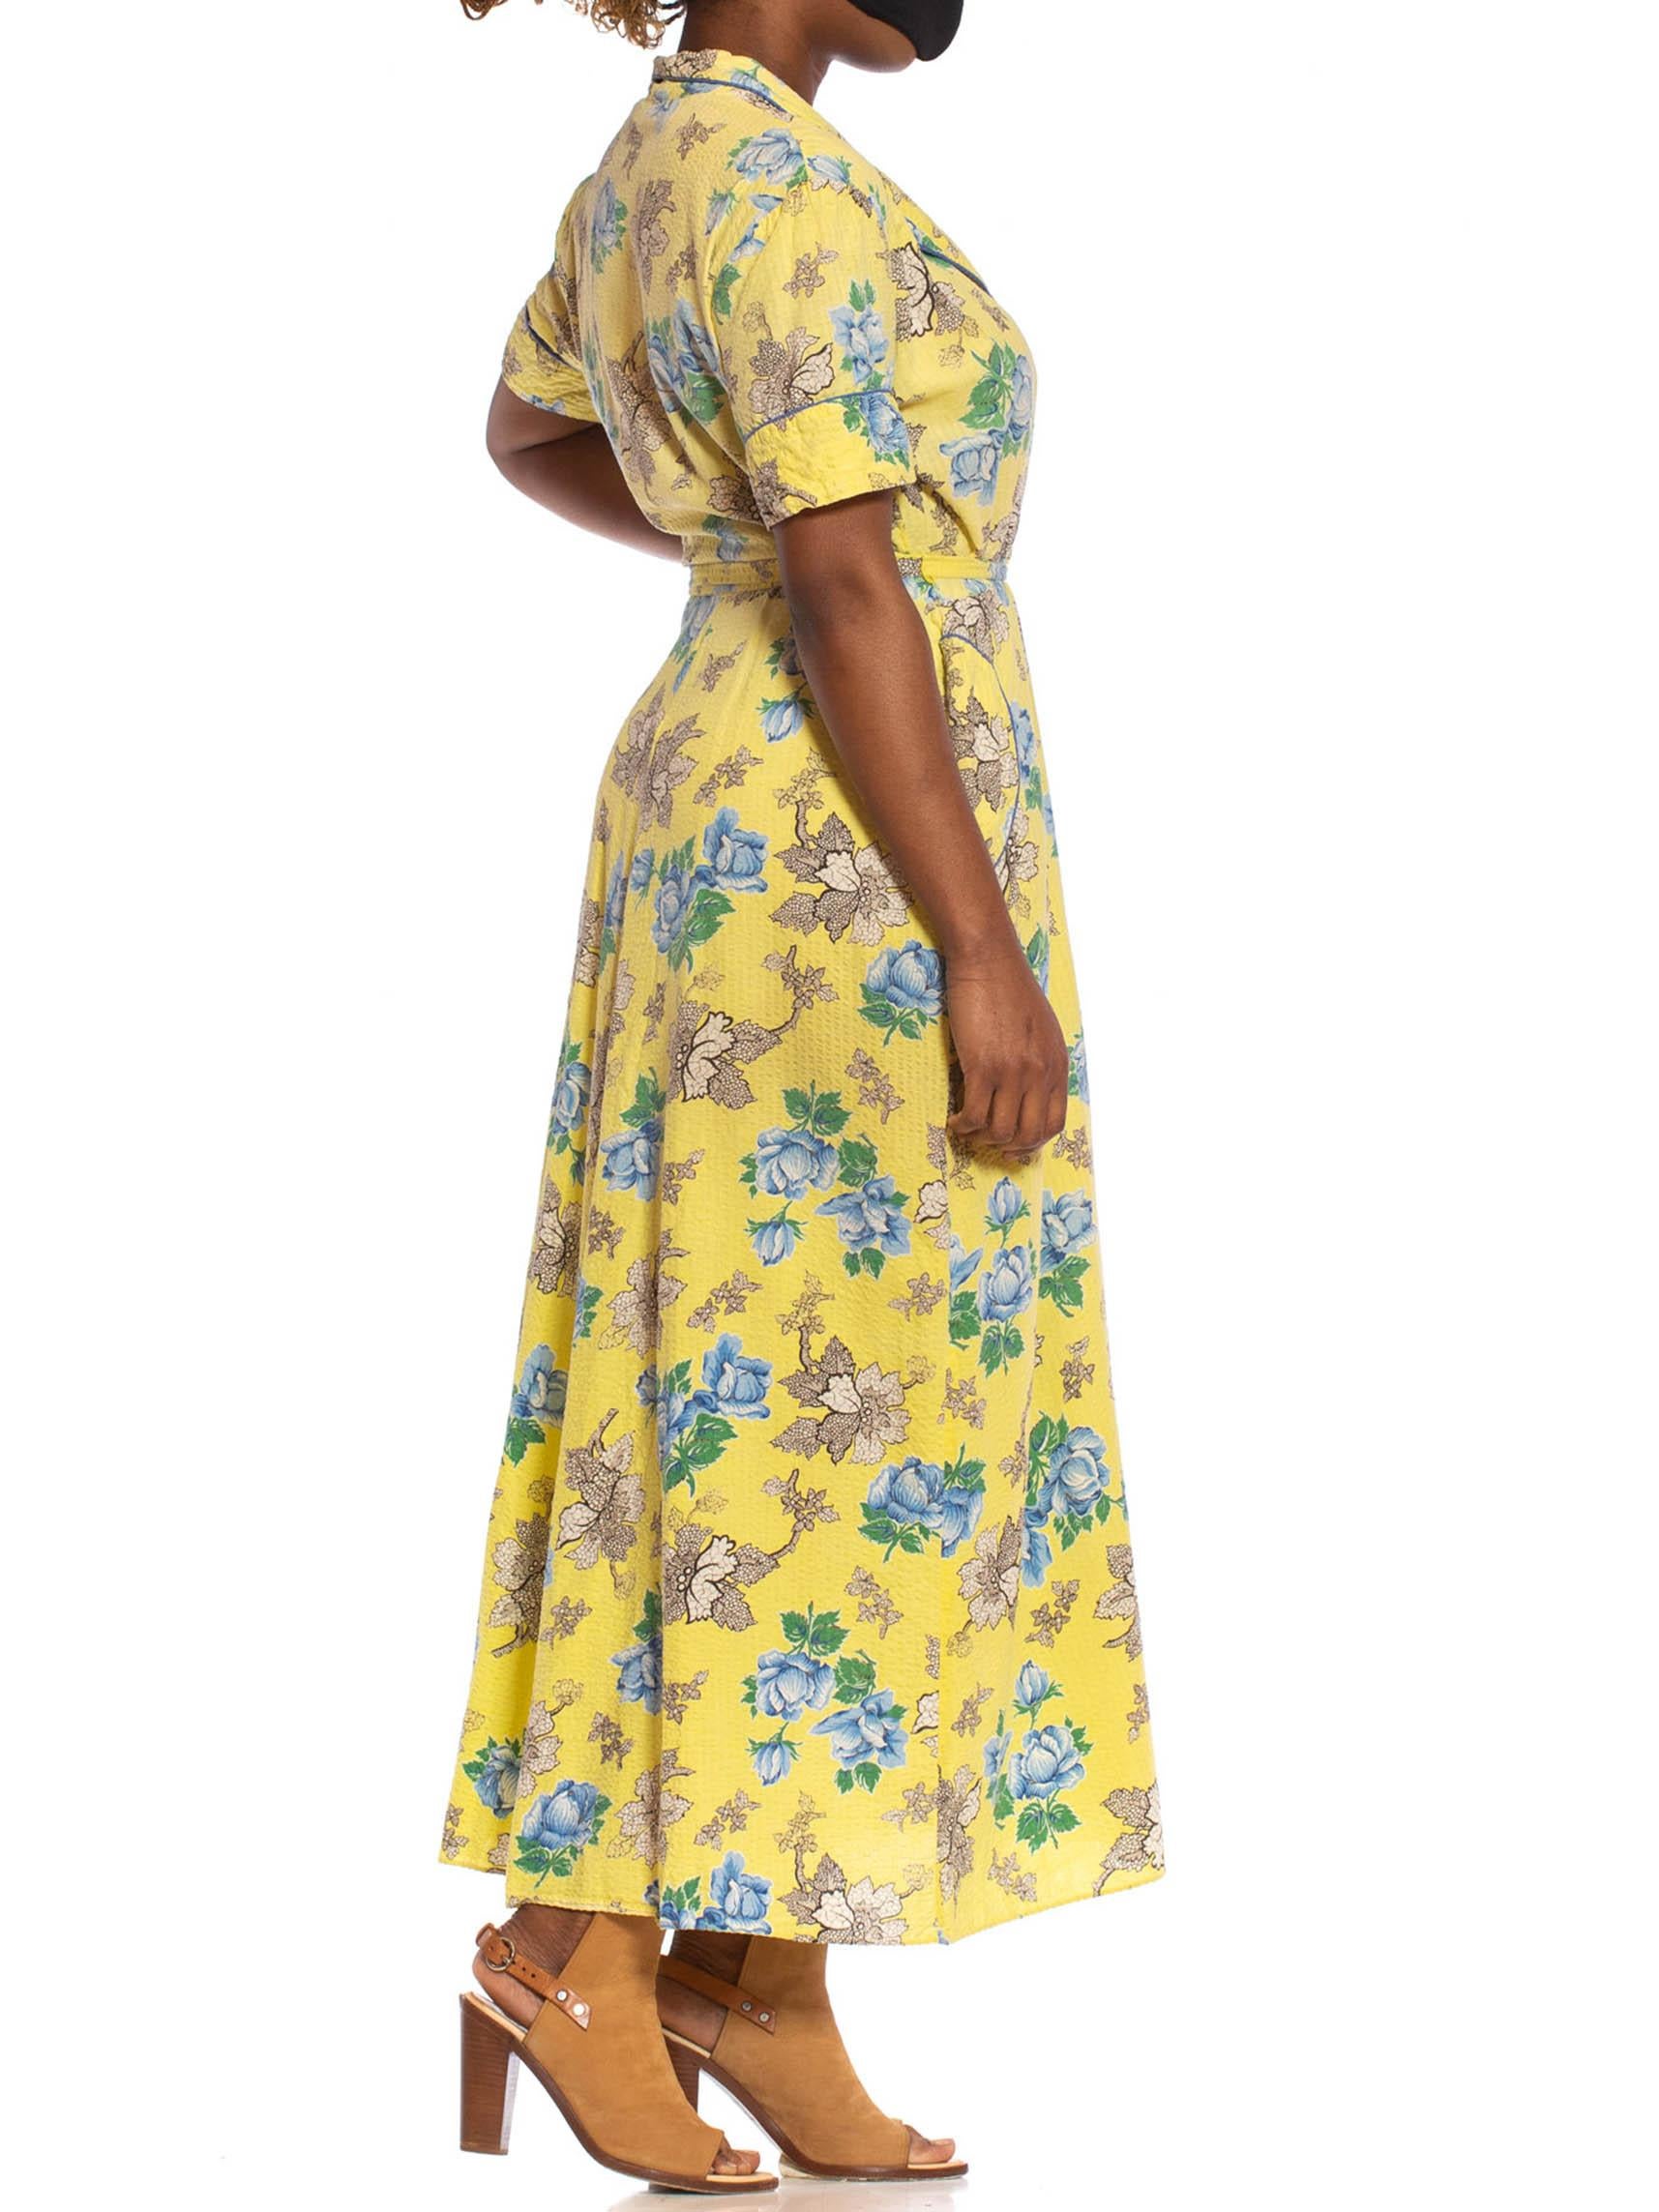 1940S Yellow Cotton Seersucker Blue Floral Wrap House Dress With Belt & Pocket For Sale 1